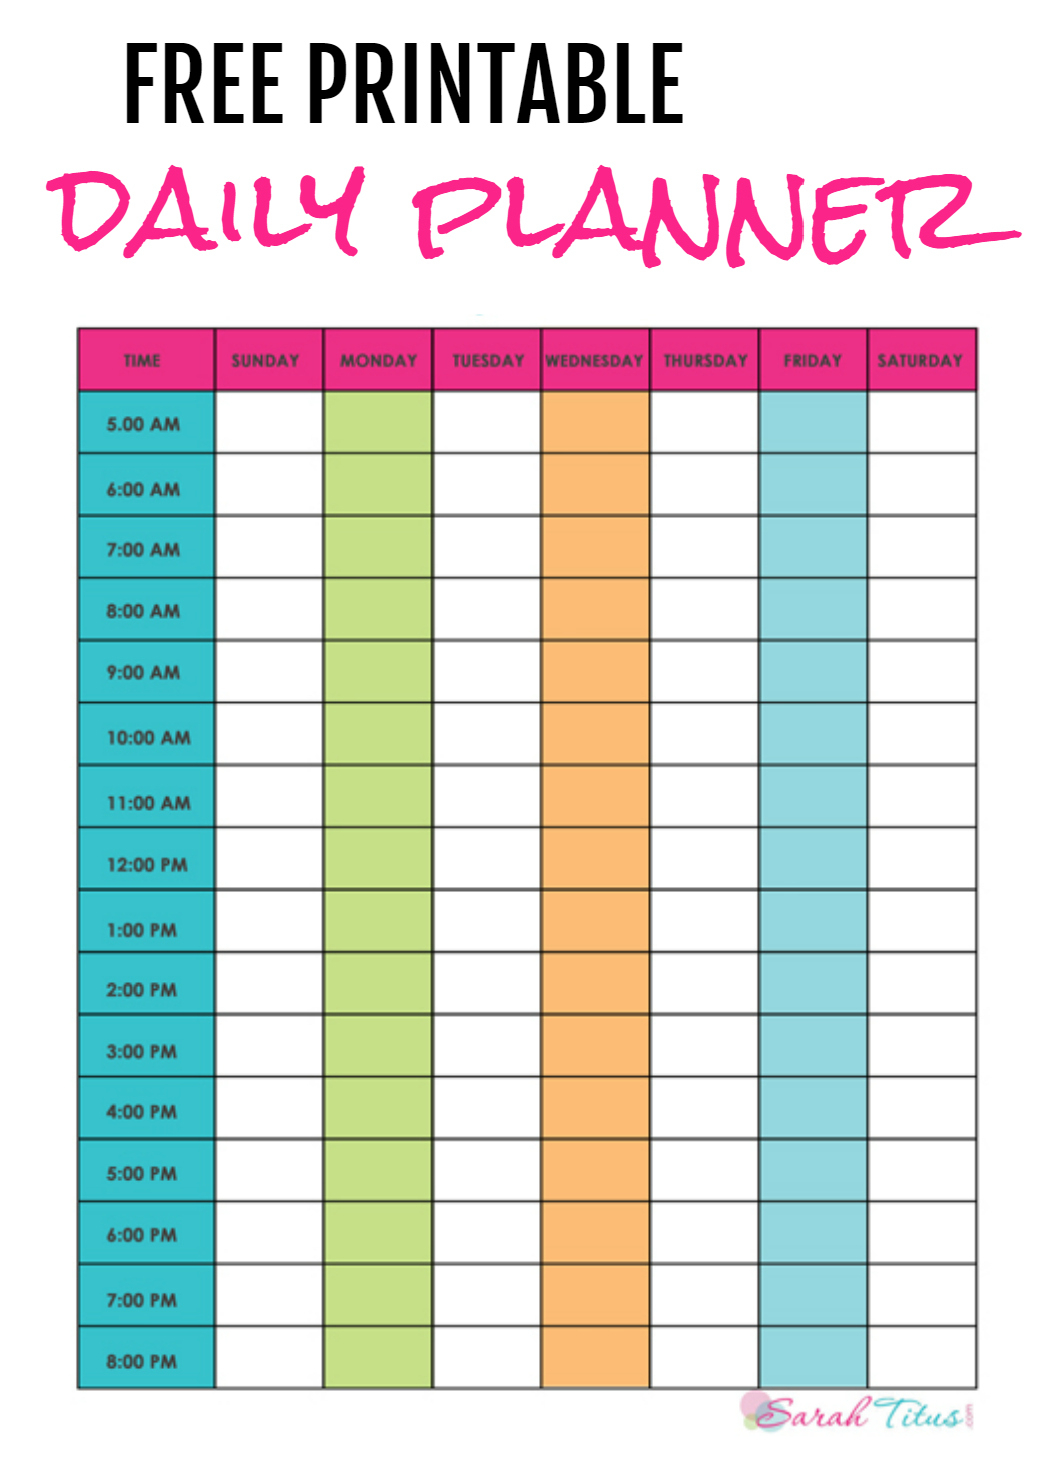 Free Daily Planner Printable  Sarah Titus inside Printable Weekly Planner With Time Slots